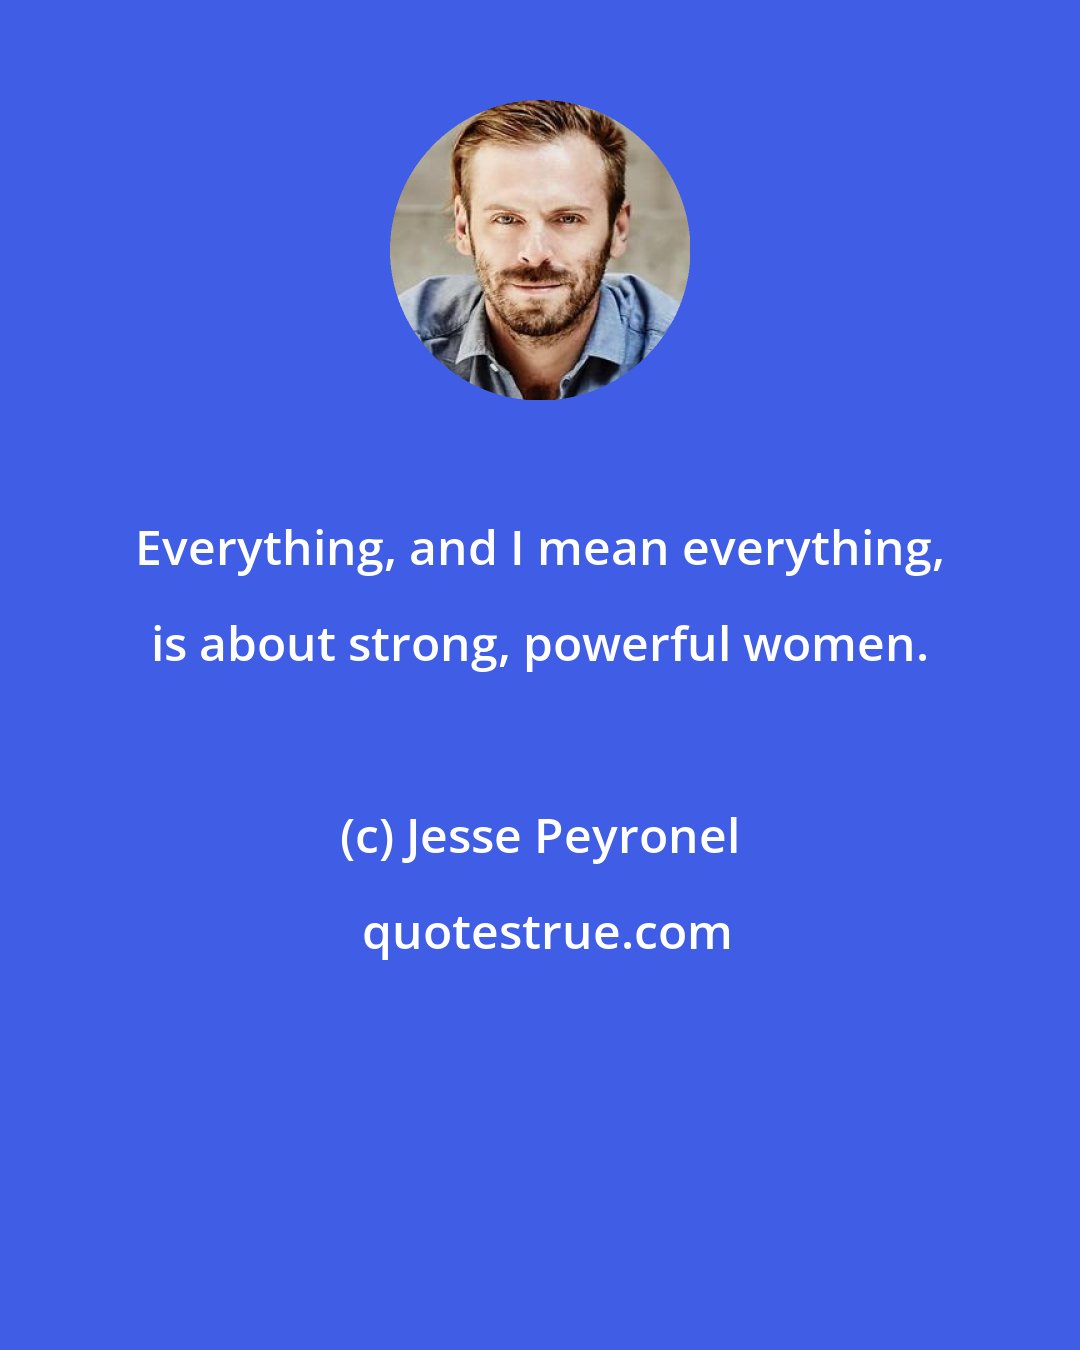 Jesse Peyronel: Everything, and I mean everything, is about strong, powerful women.